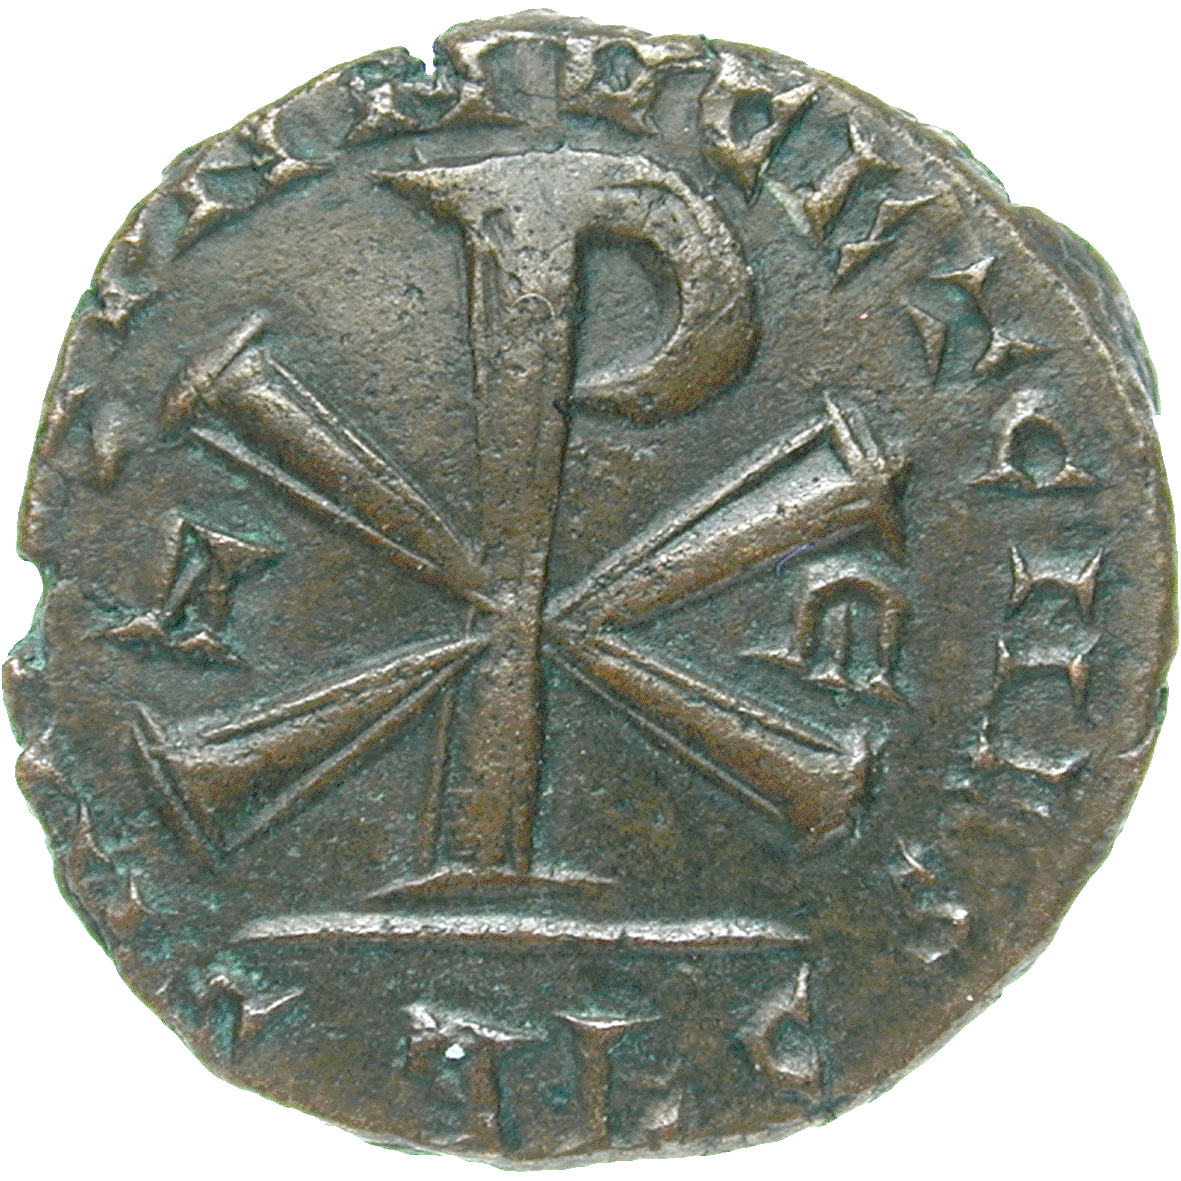 Migration Period, Undefined Germanic Issue in the Name of Magnentius, Maiorina? (reverse)